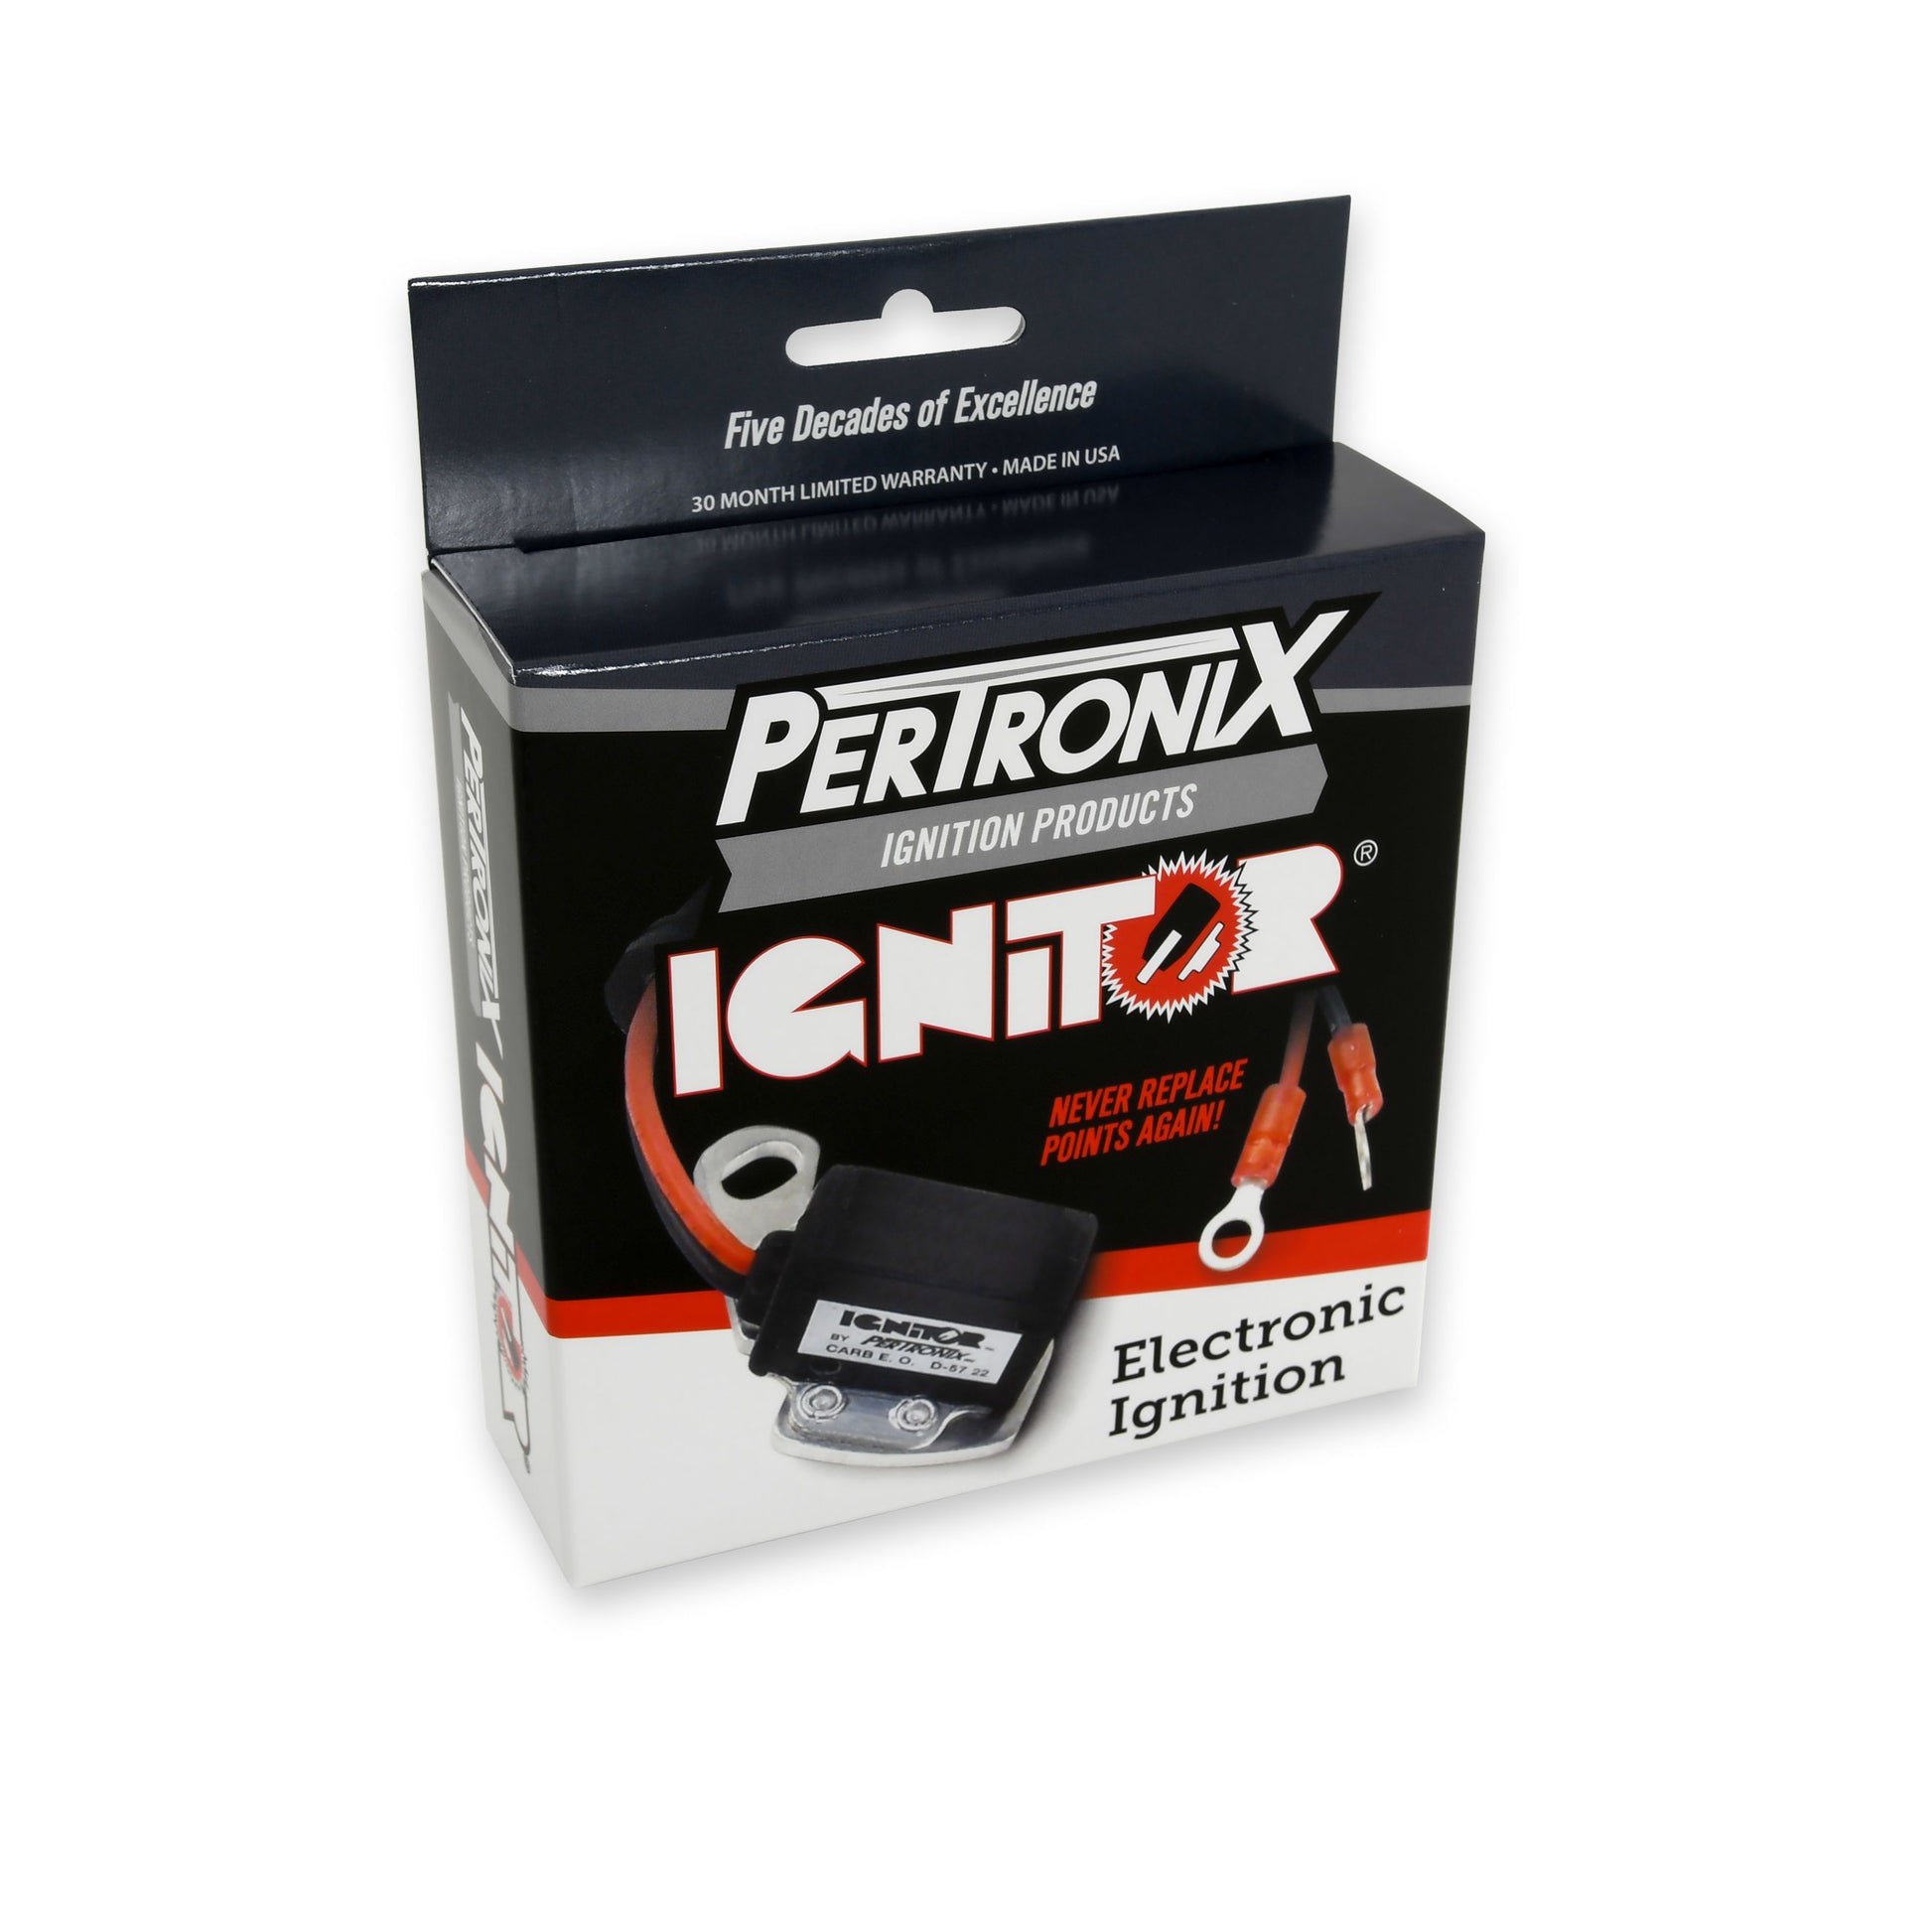 PerTronix Ignitor Electronic Ignition Conversion Kit-1541P12-package